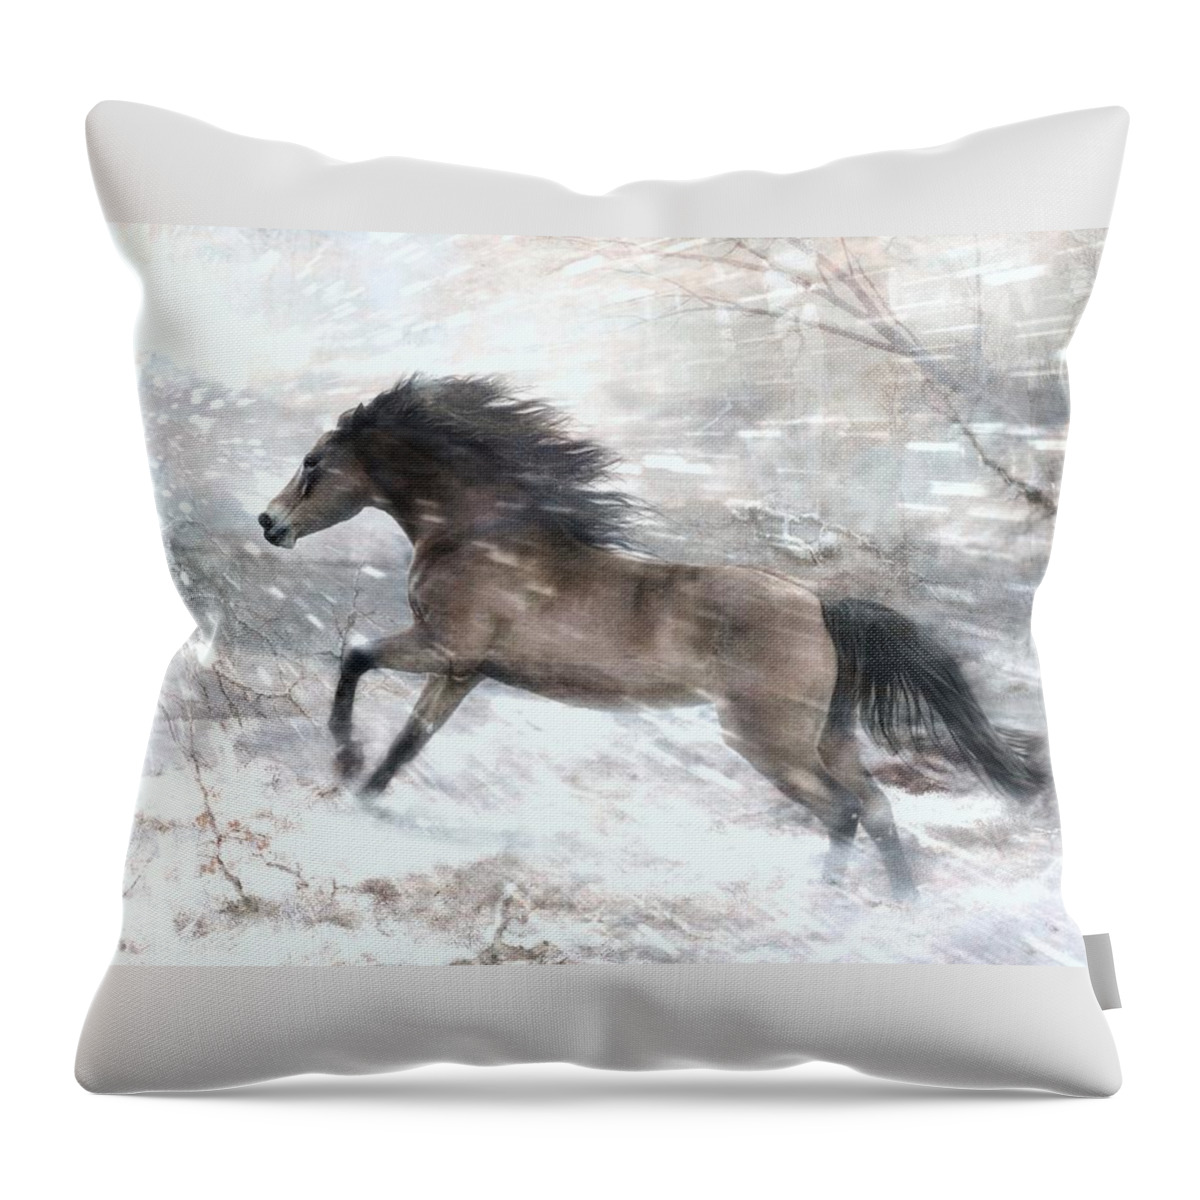  Throw Pillow featuring the digital art Against The Wind by Dorota Kudyba